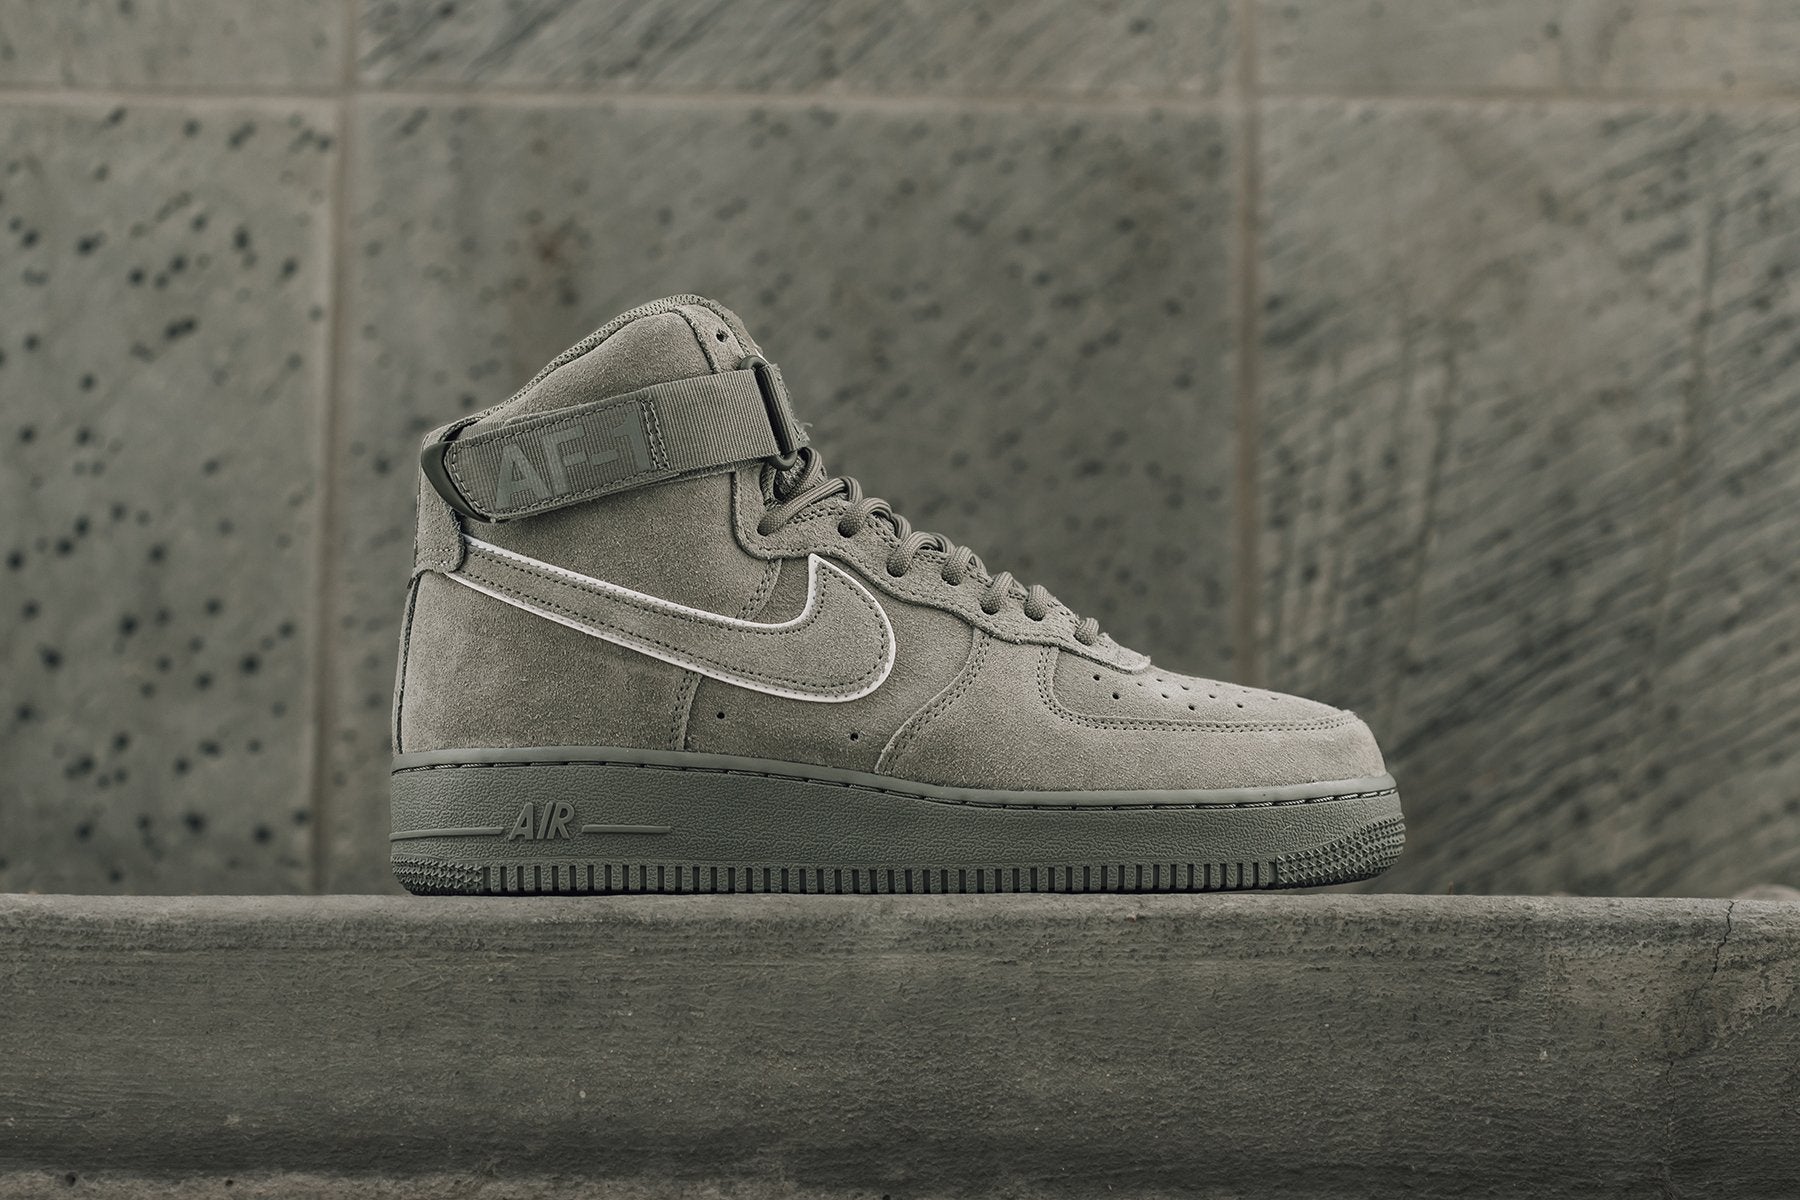 Nike Air Force 1 High '07 LV8 sneakers in stone - STONE